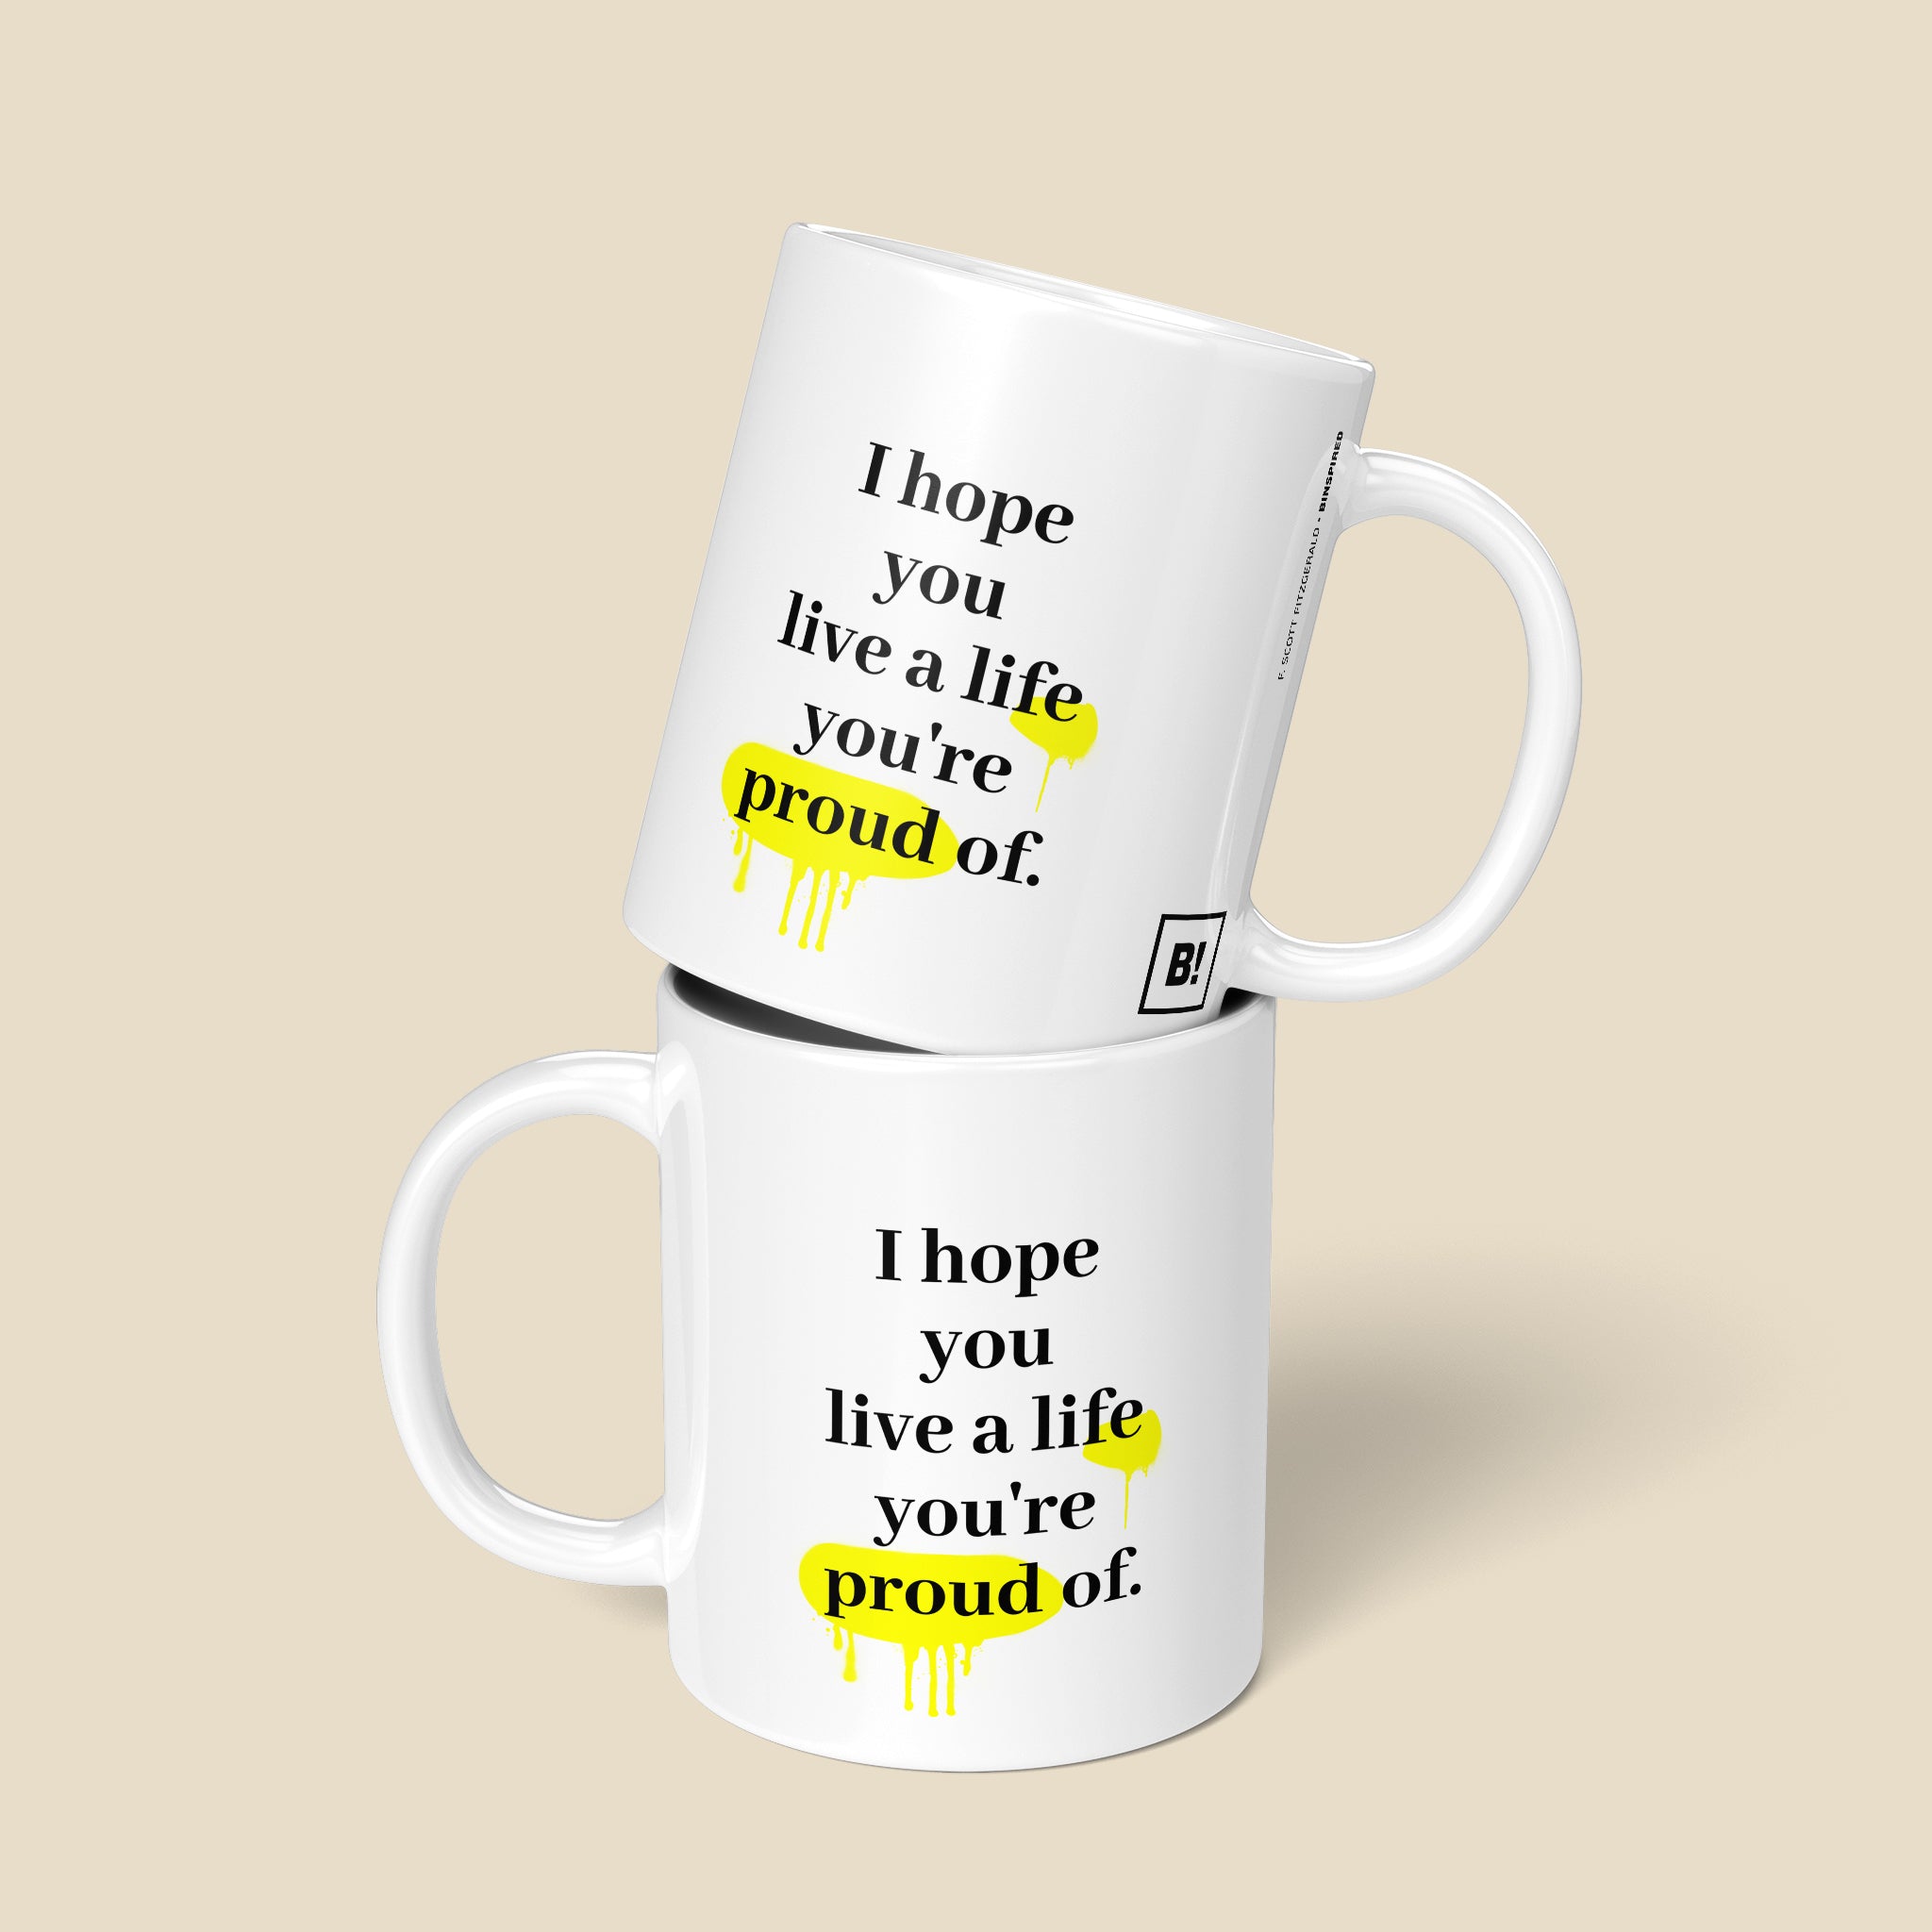 Be inspired by F. Scott Fitzgerald's famous quote, "I hope you live a life you're proud of" on this 11oz white glossy coffee mug with a front and back view.